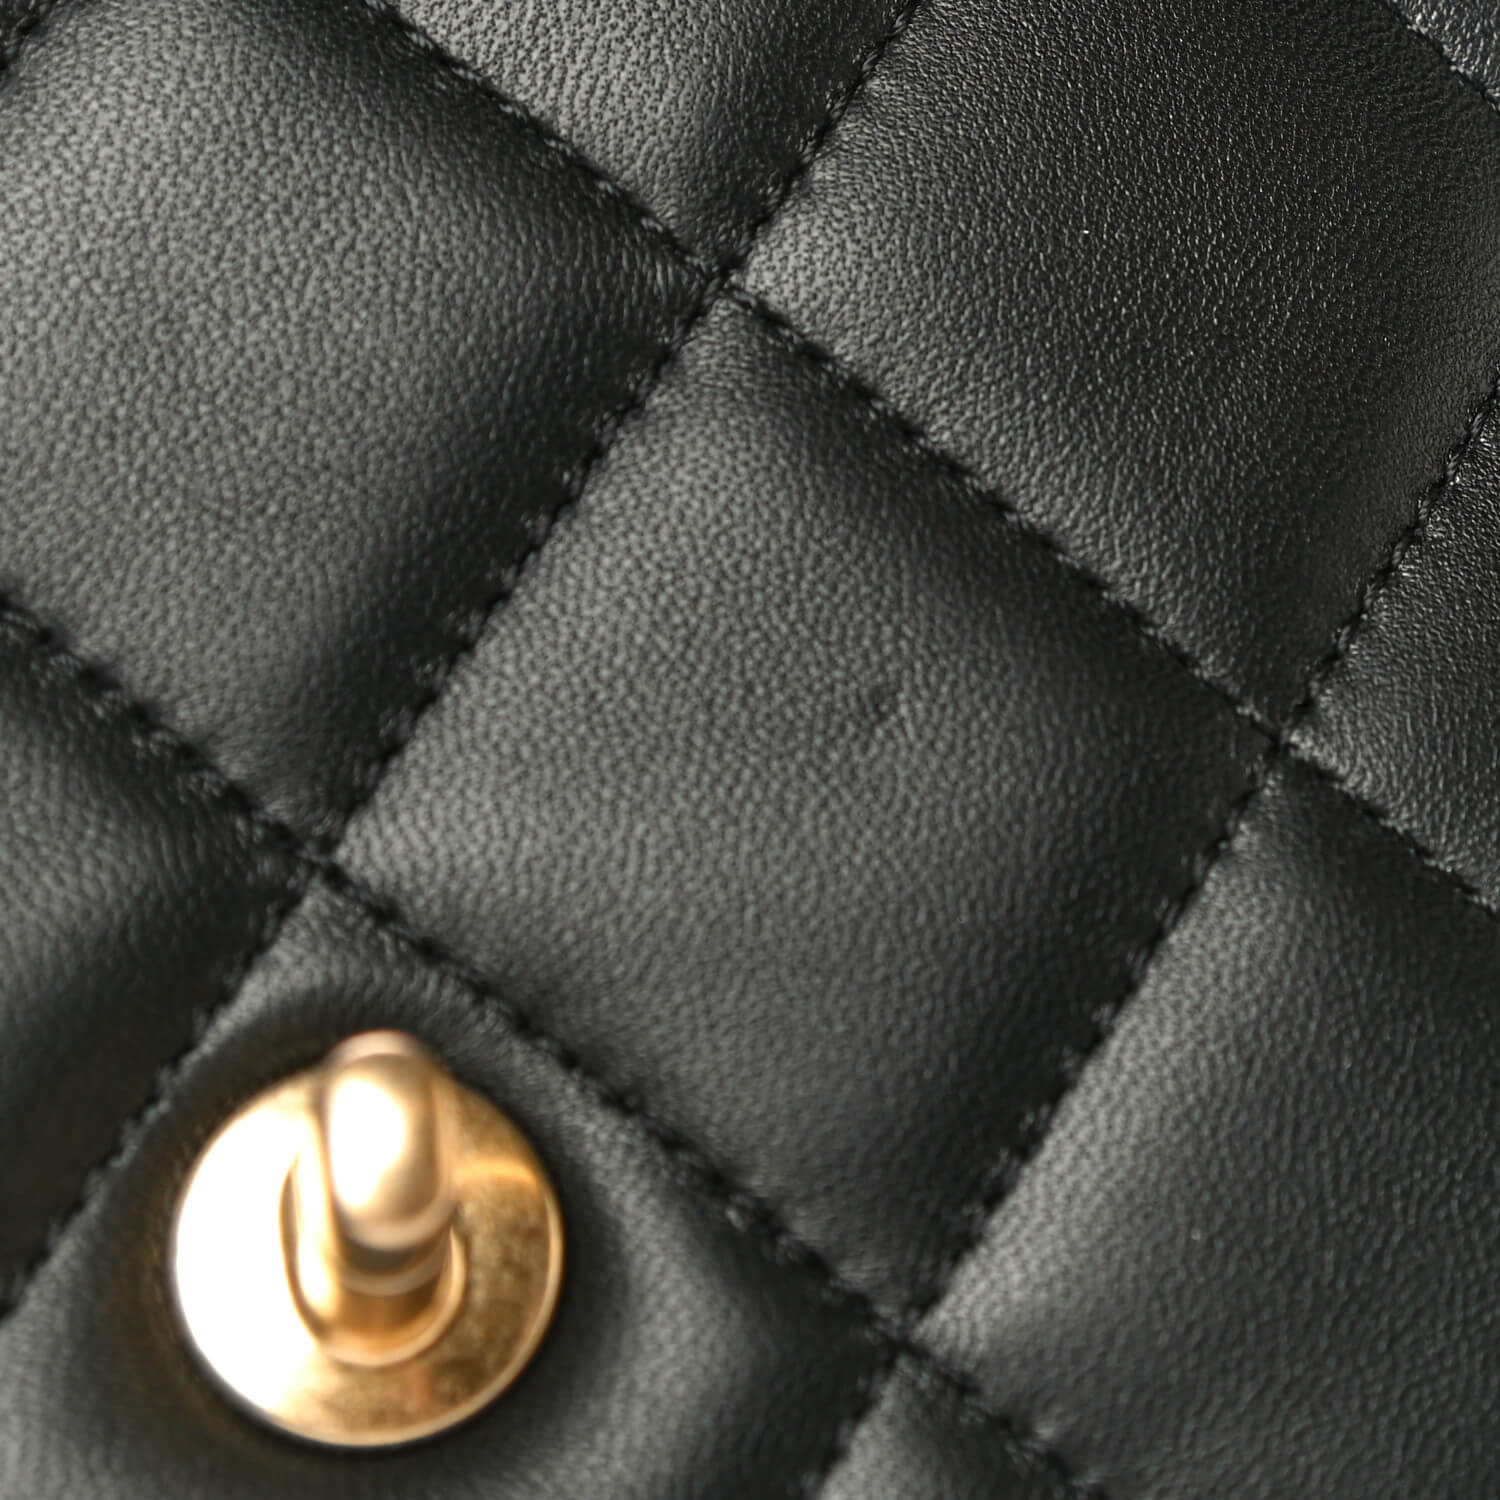 Lambskin leather on a Chanel bag